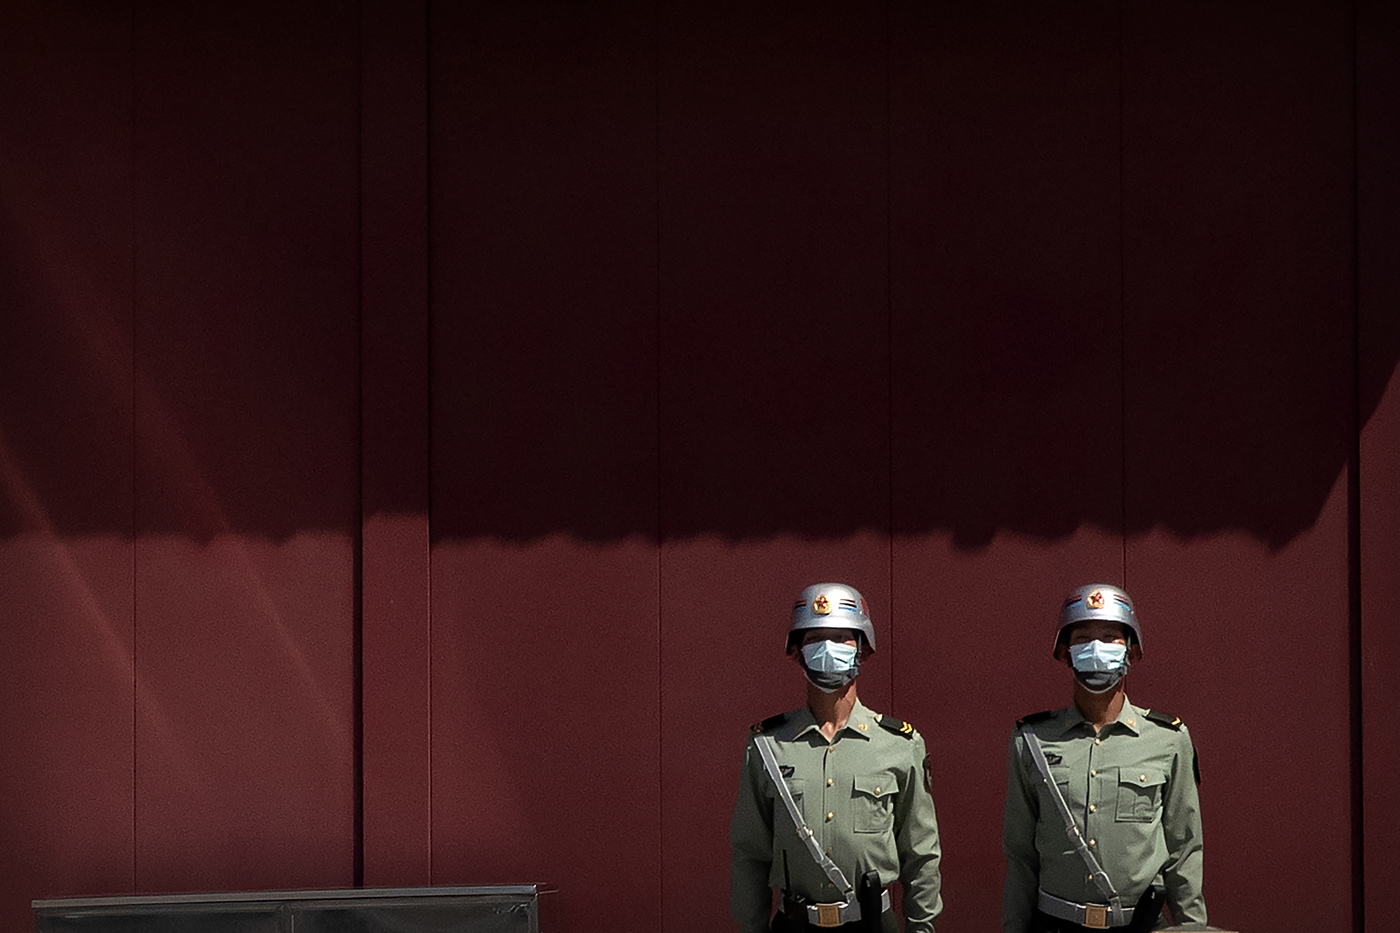 Paramilitary police wearing face masks to protect against the spread of the new coronavirus stand guard near Tiananmen Square in Beijing, Wednesday, May 20, 2020. China's rubber-stamp legislature is set to begin its annual session on Friday after being delayed several months amid the coronavirus outbreak. (AP Photo/Mark Schiefelbein)